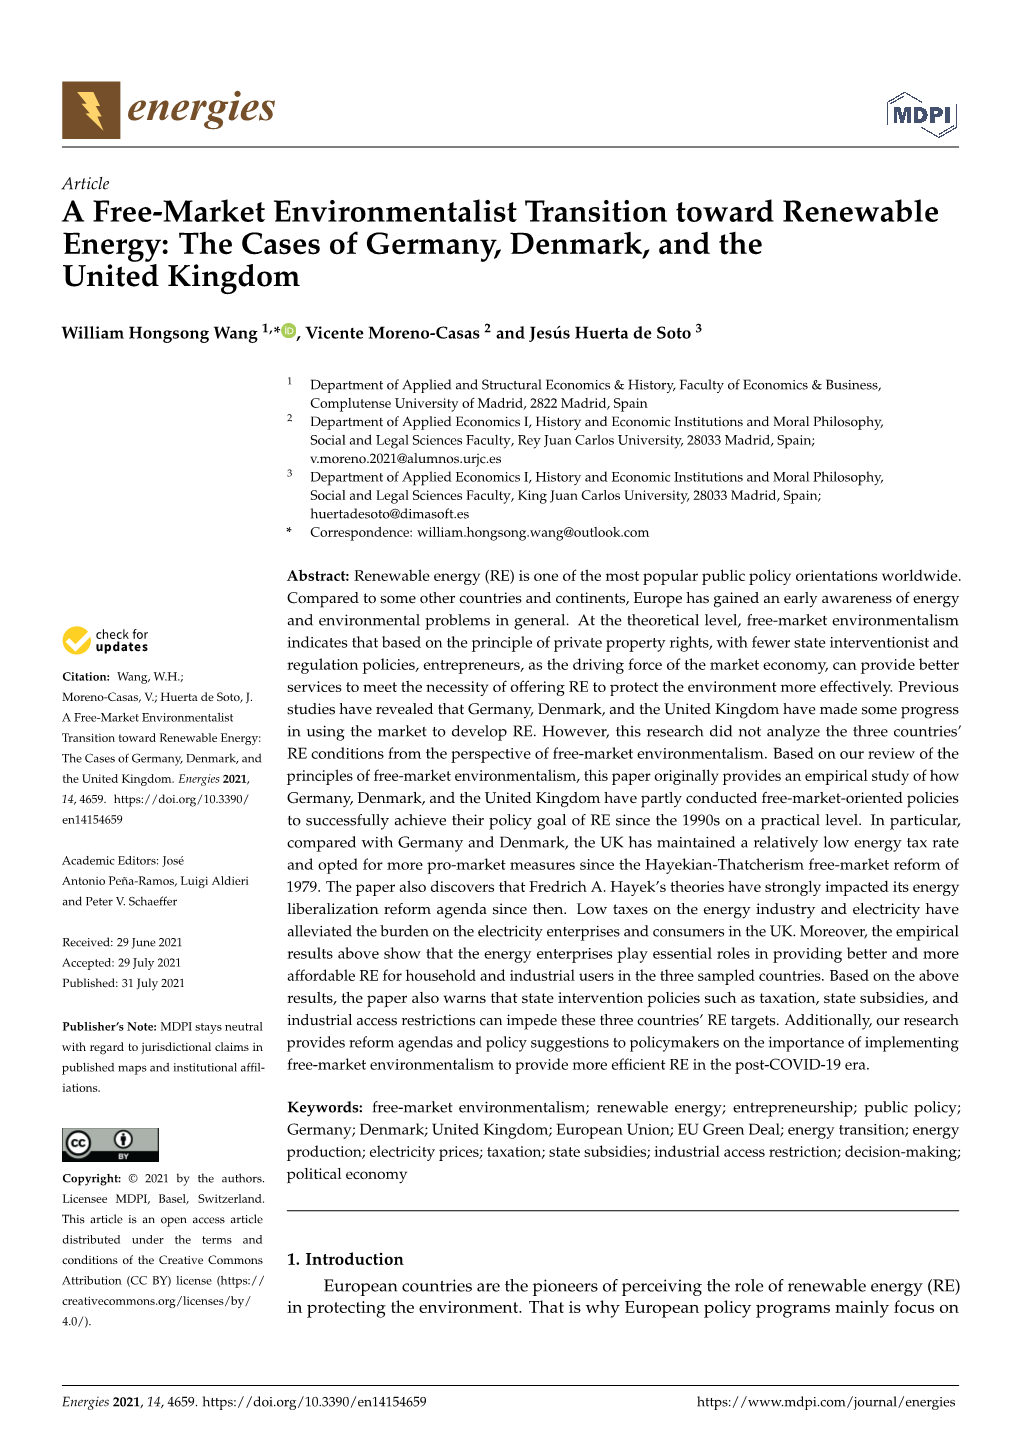 A Free-Market Environmentalist Transition Toward Renewable Energy: the Cases of Germany, Denmark, and the United Kingdom